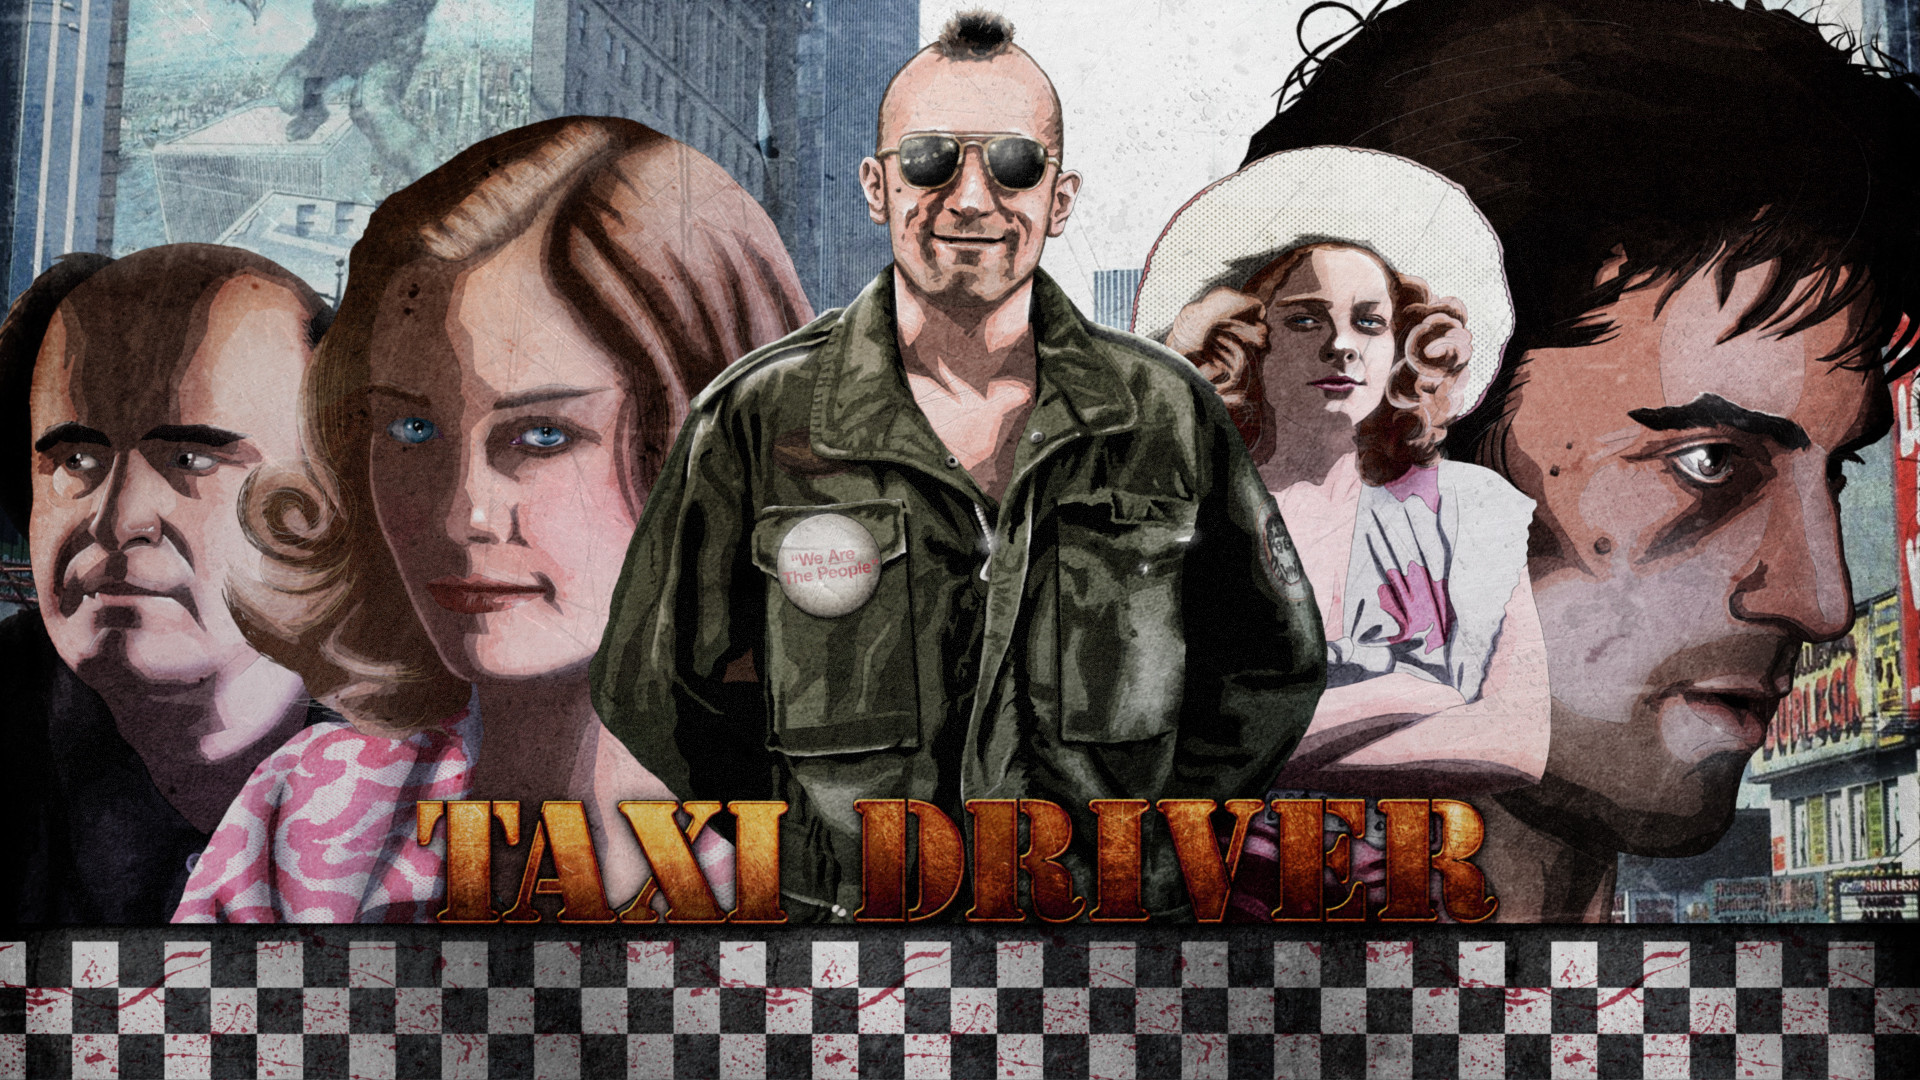 1920x1080 Taxi Driver by happydragonpictures Taxi Driver by happydragonpictures